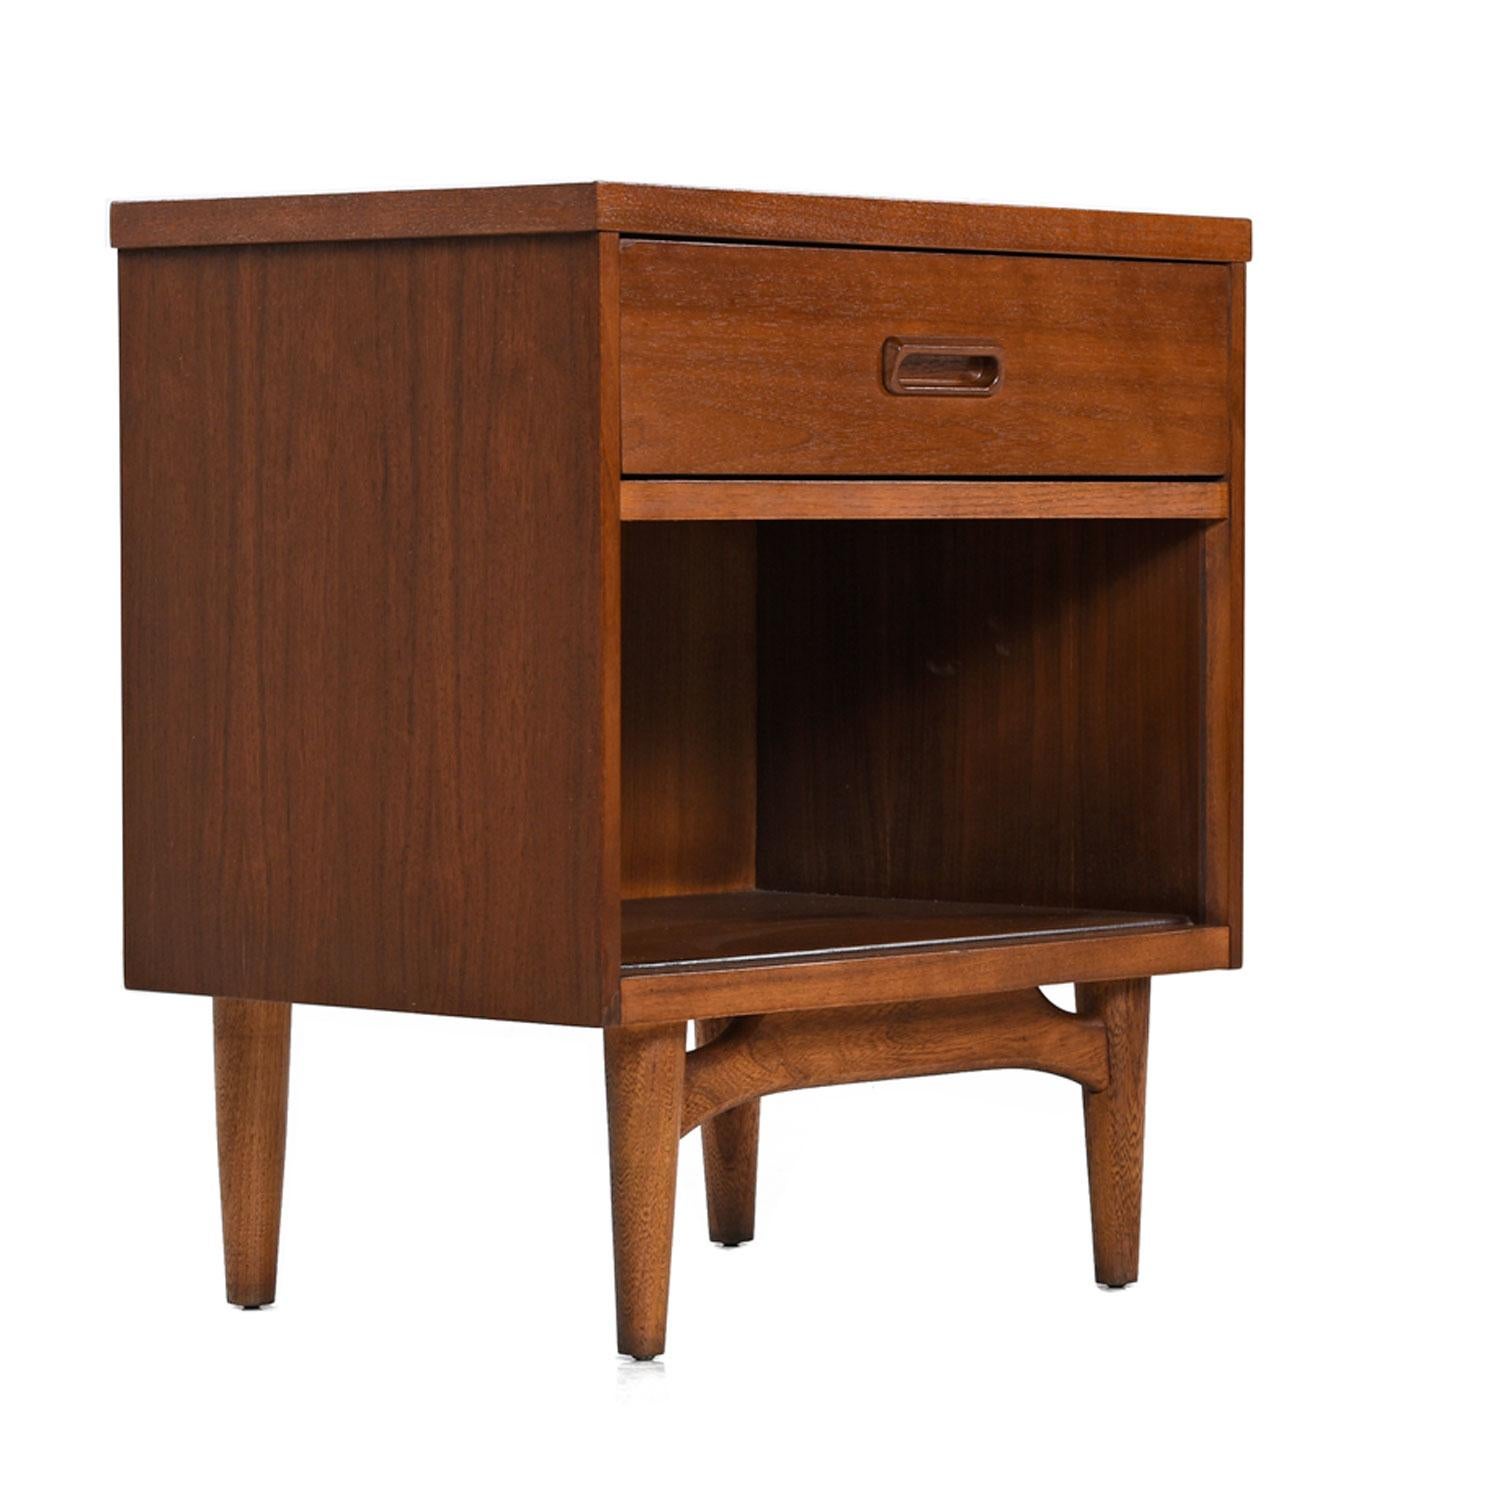 Mid-Century Modern American made walnut nightstand bedside tables with oak bases. Made by Kroehler Mfg, circa 1960s. These handsome recessed pulls on the drawers are a shade darker than the body and perfectly contrast and compliment the oak base. A